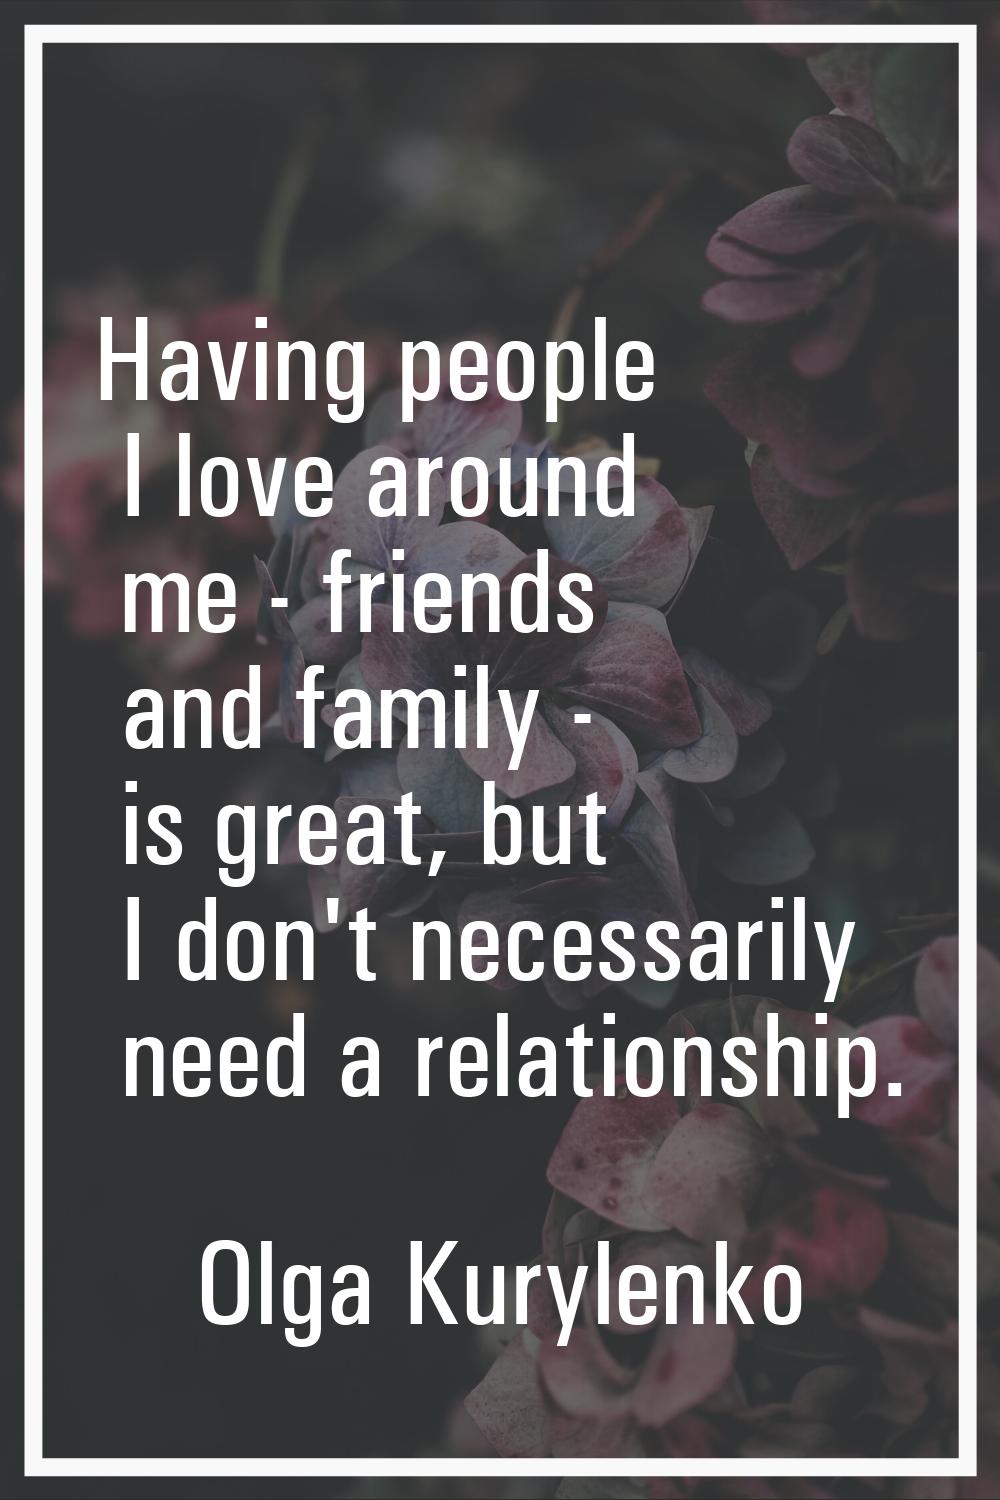 Having people I love around me - friends and family - is great, but I don't necessarily need a rela